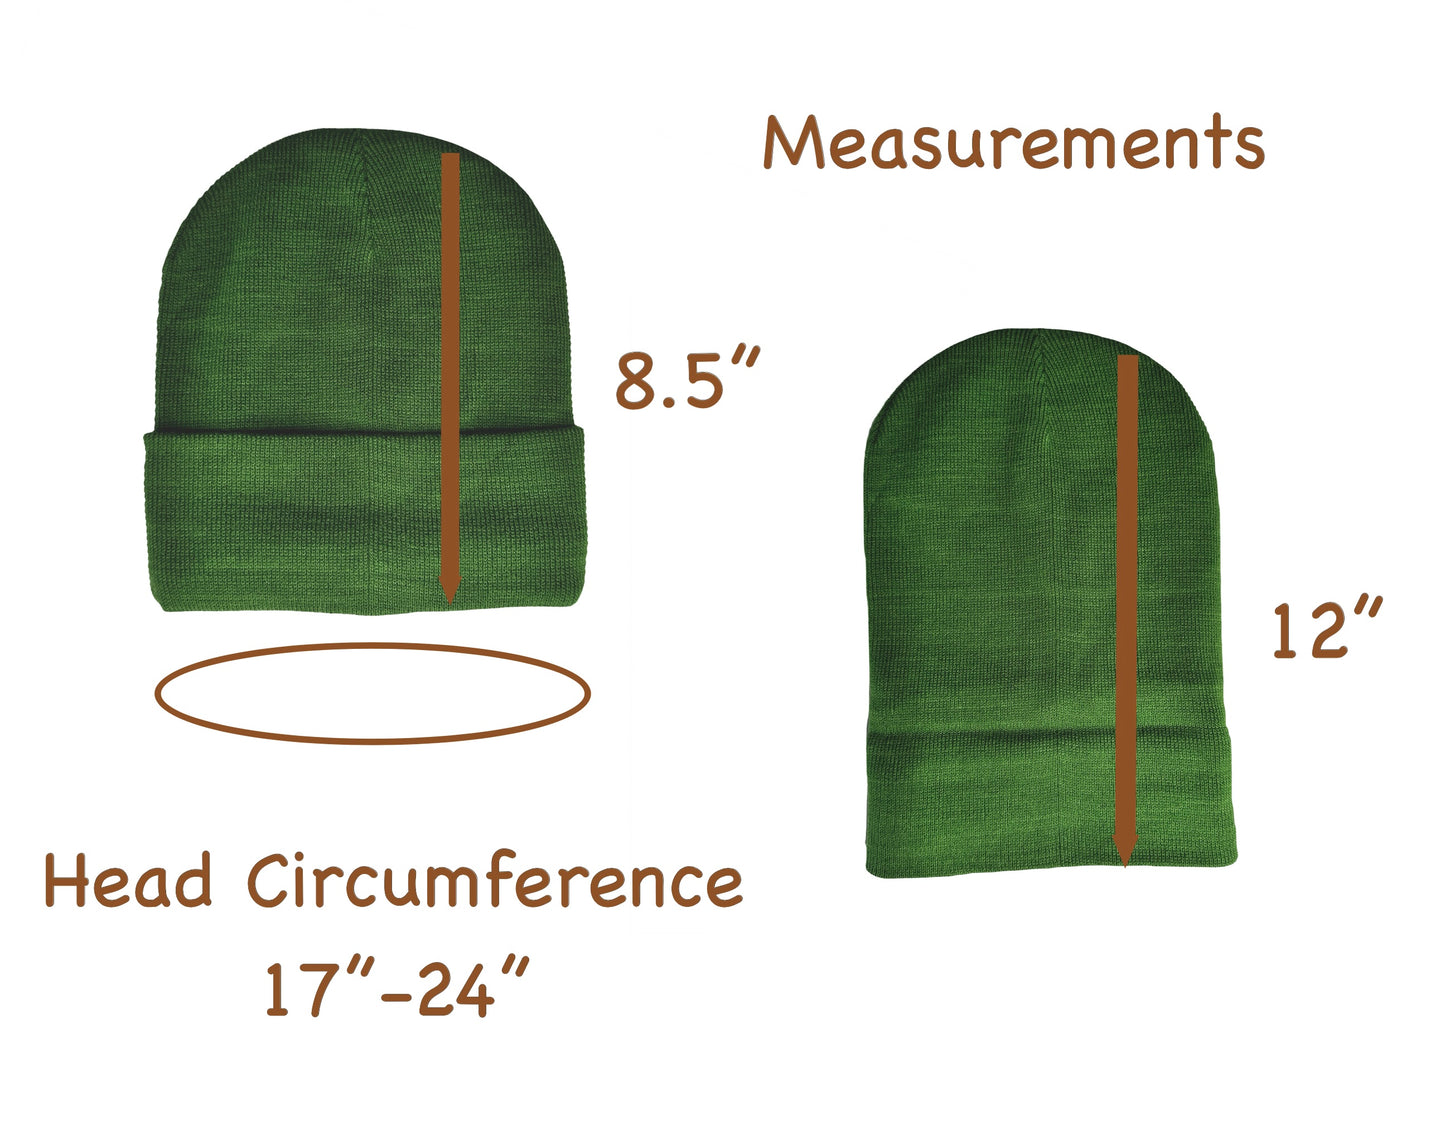 Green Satin Lined Beanie Hat